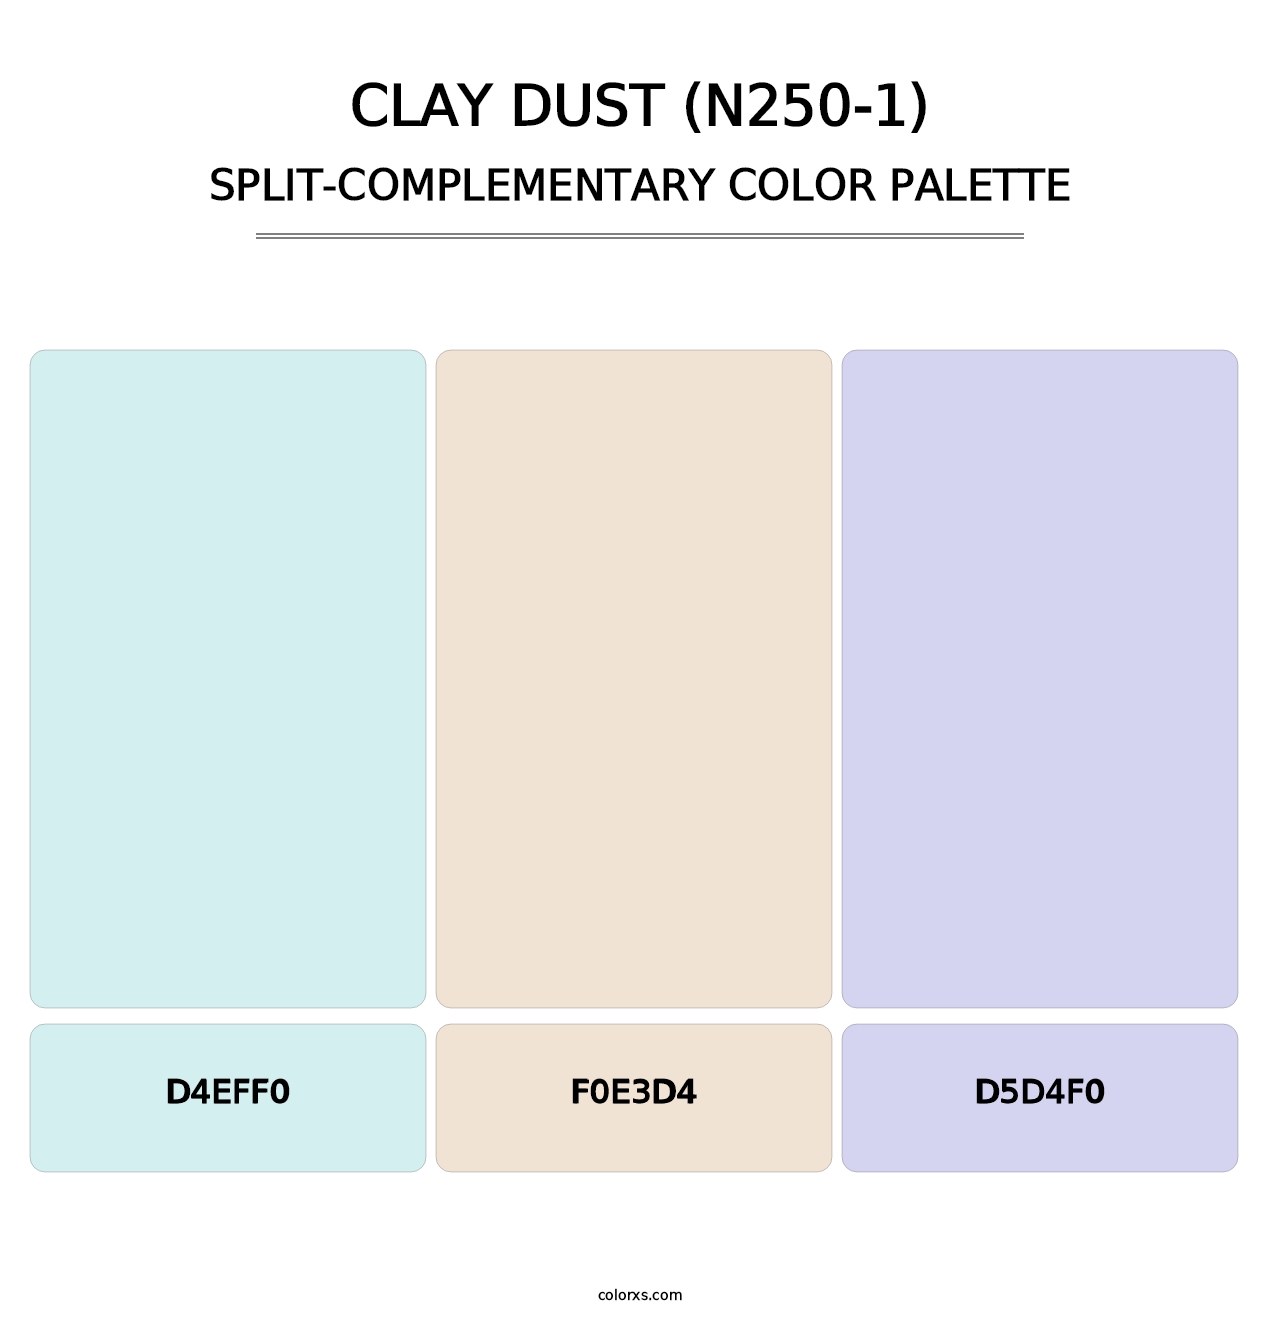 Clay Dust (N250-1) - Split-Complementary Color Palette